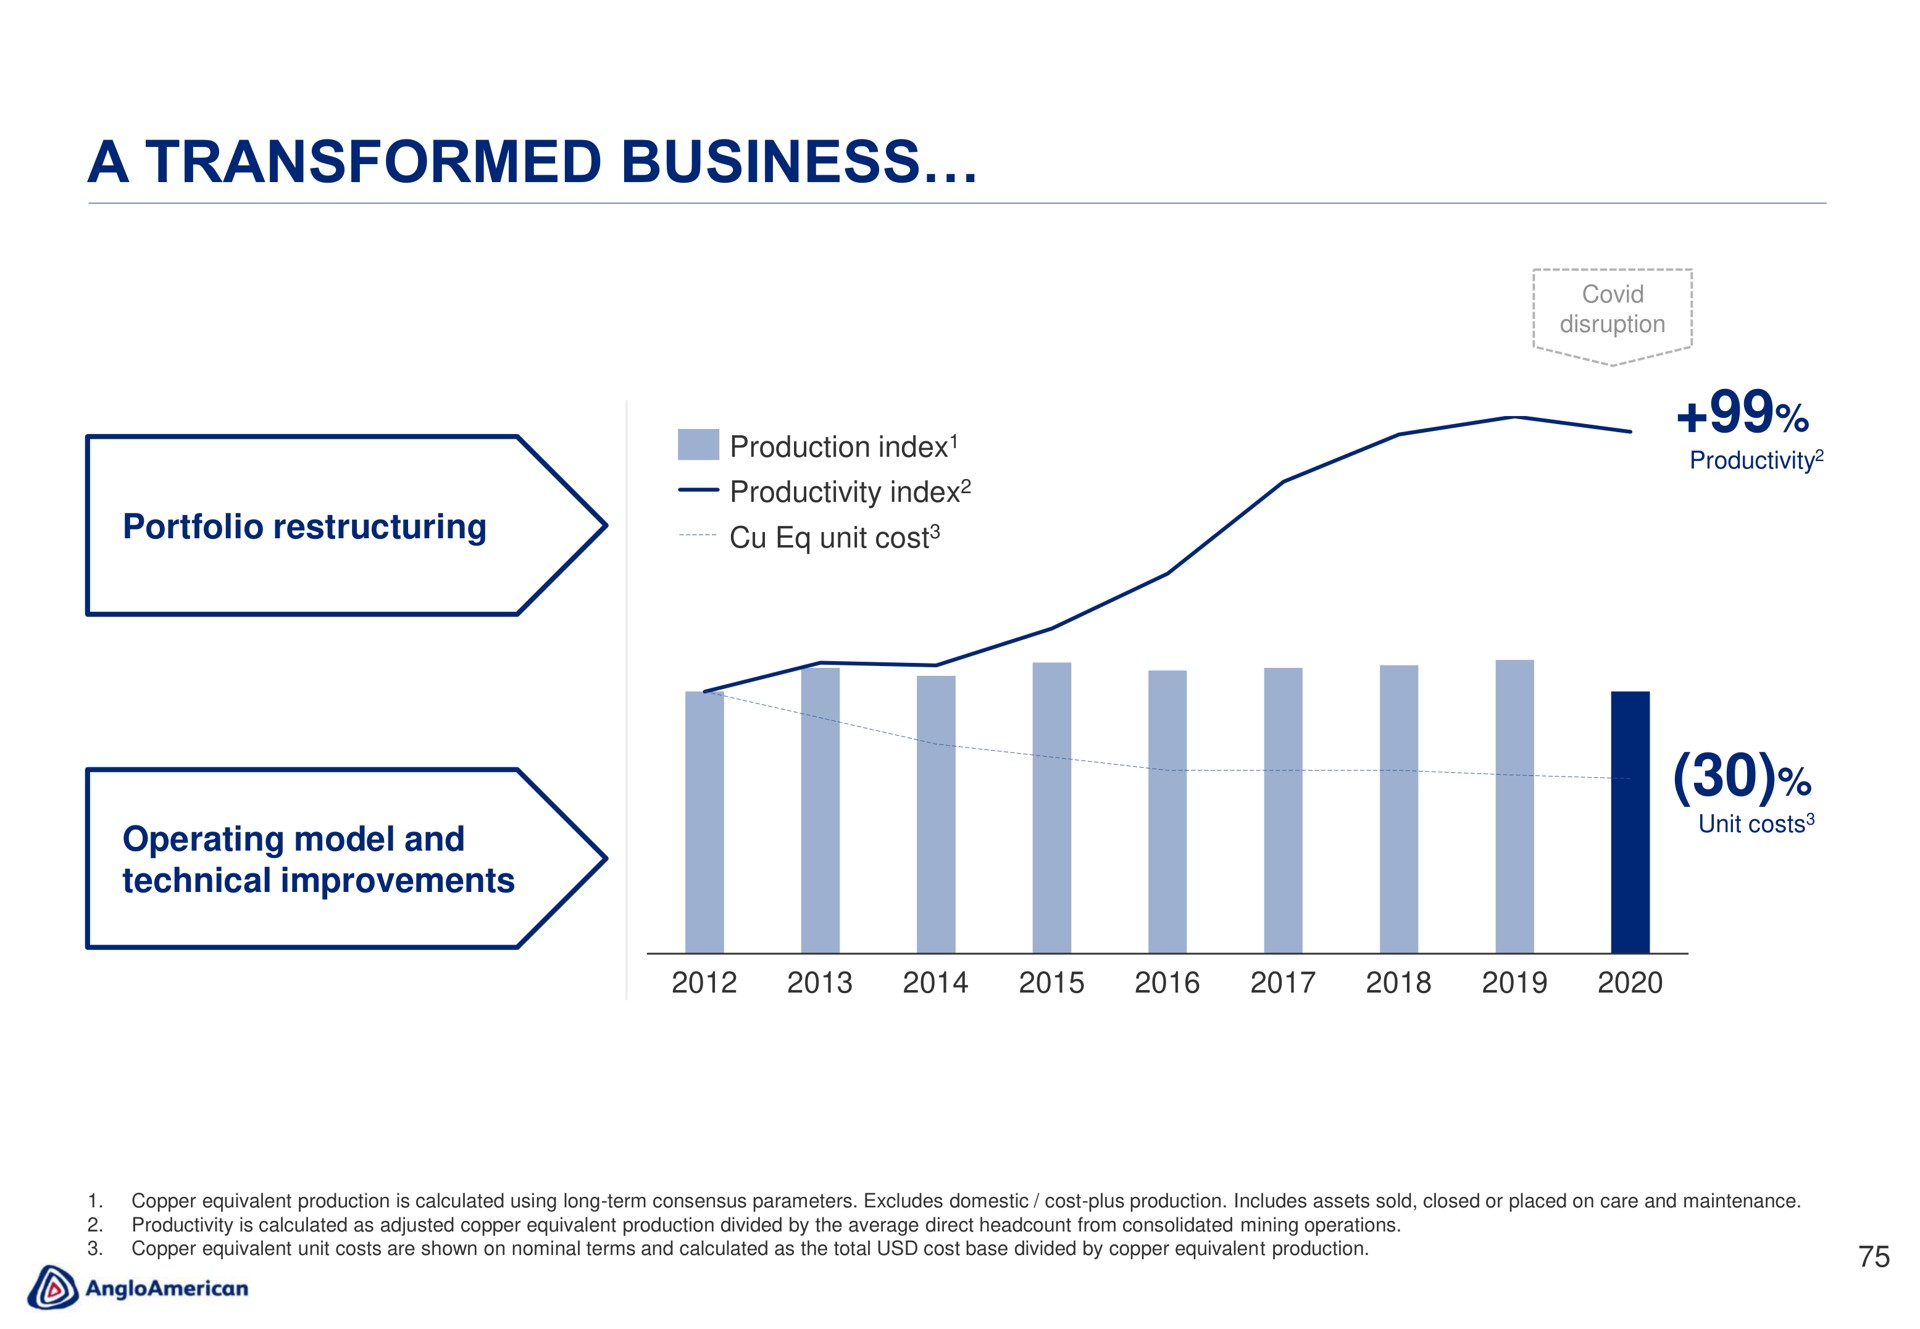 a transformed business | AngloAmerican